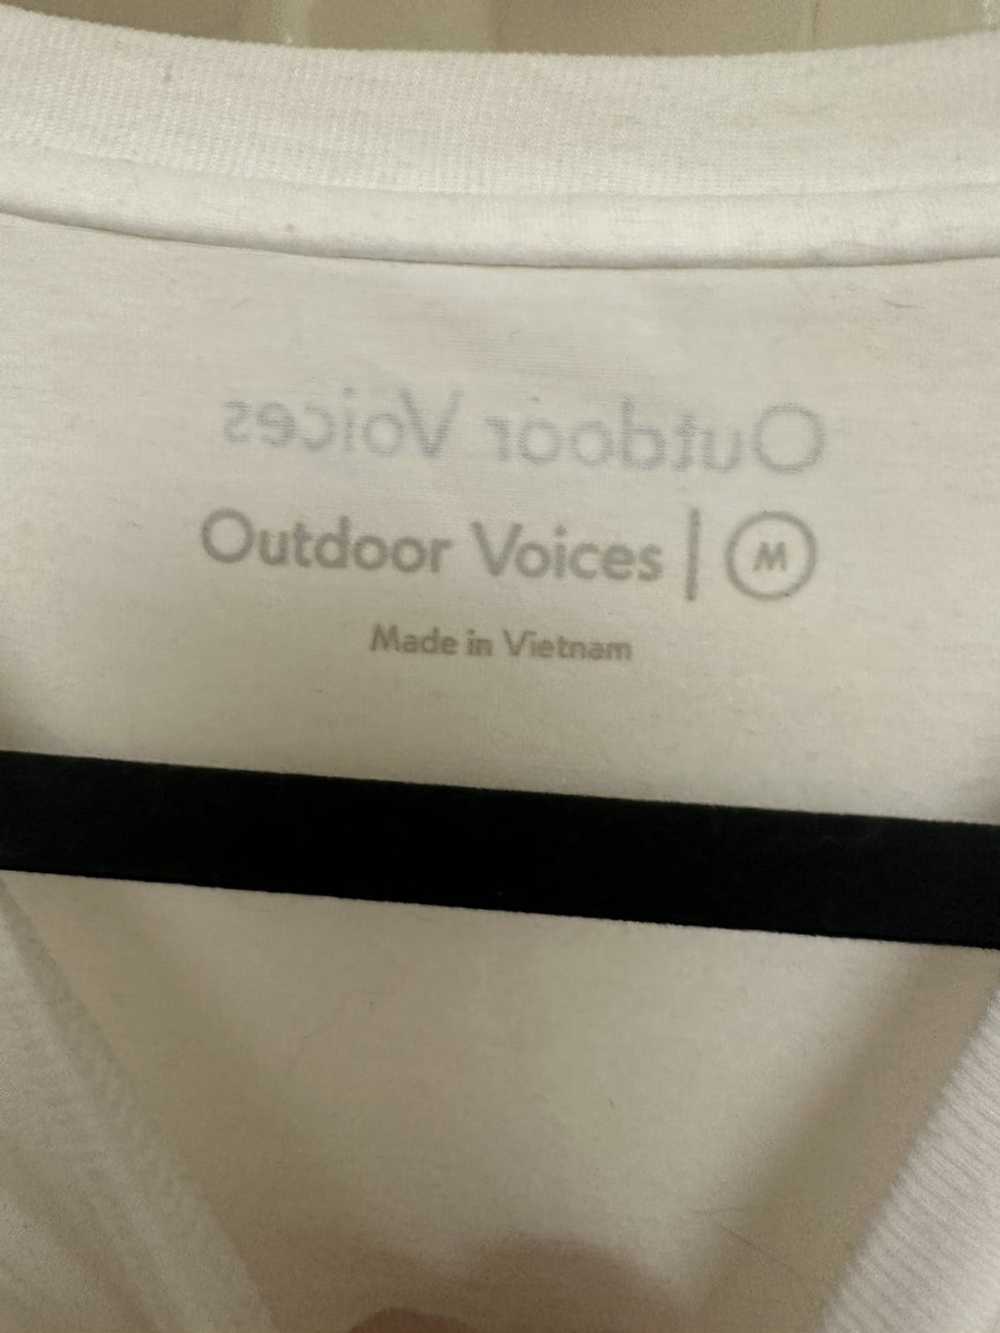 Outdoor Voices Outdoor Voices White Tee Med - image 2